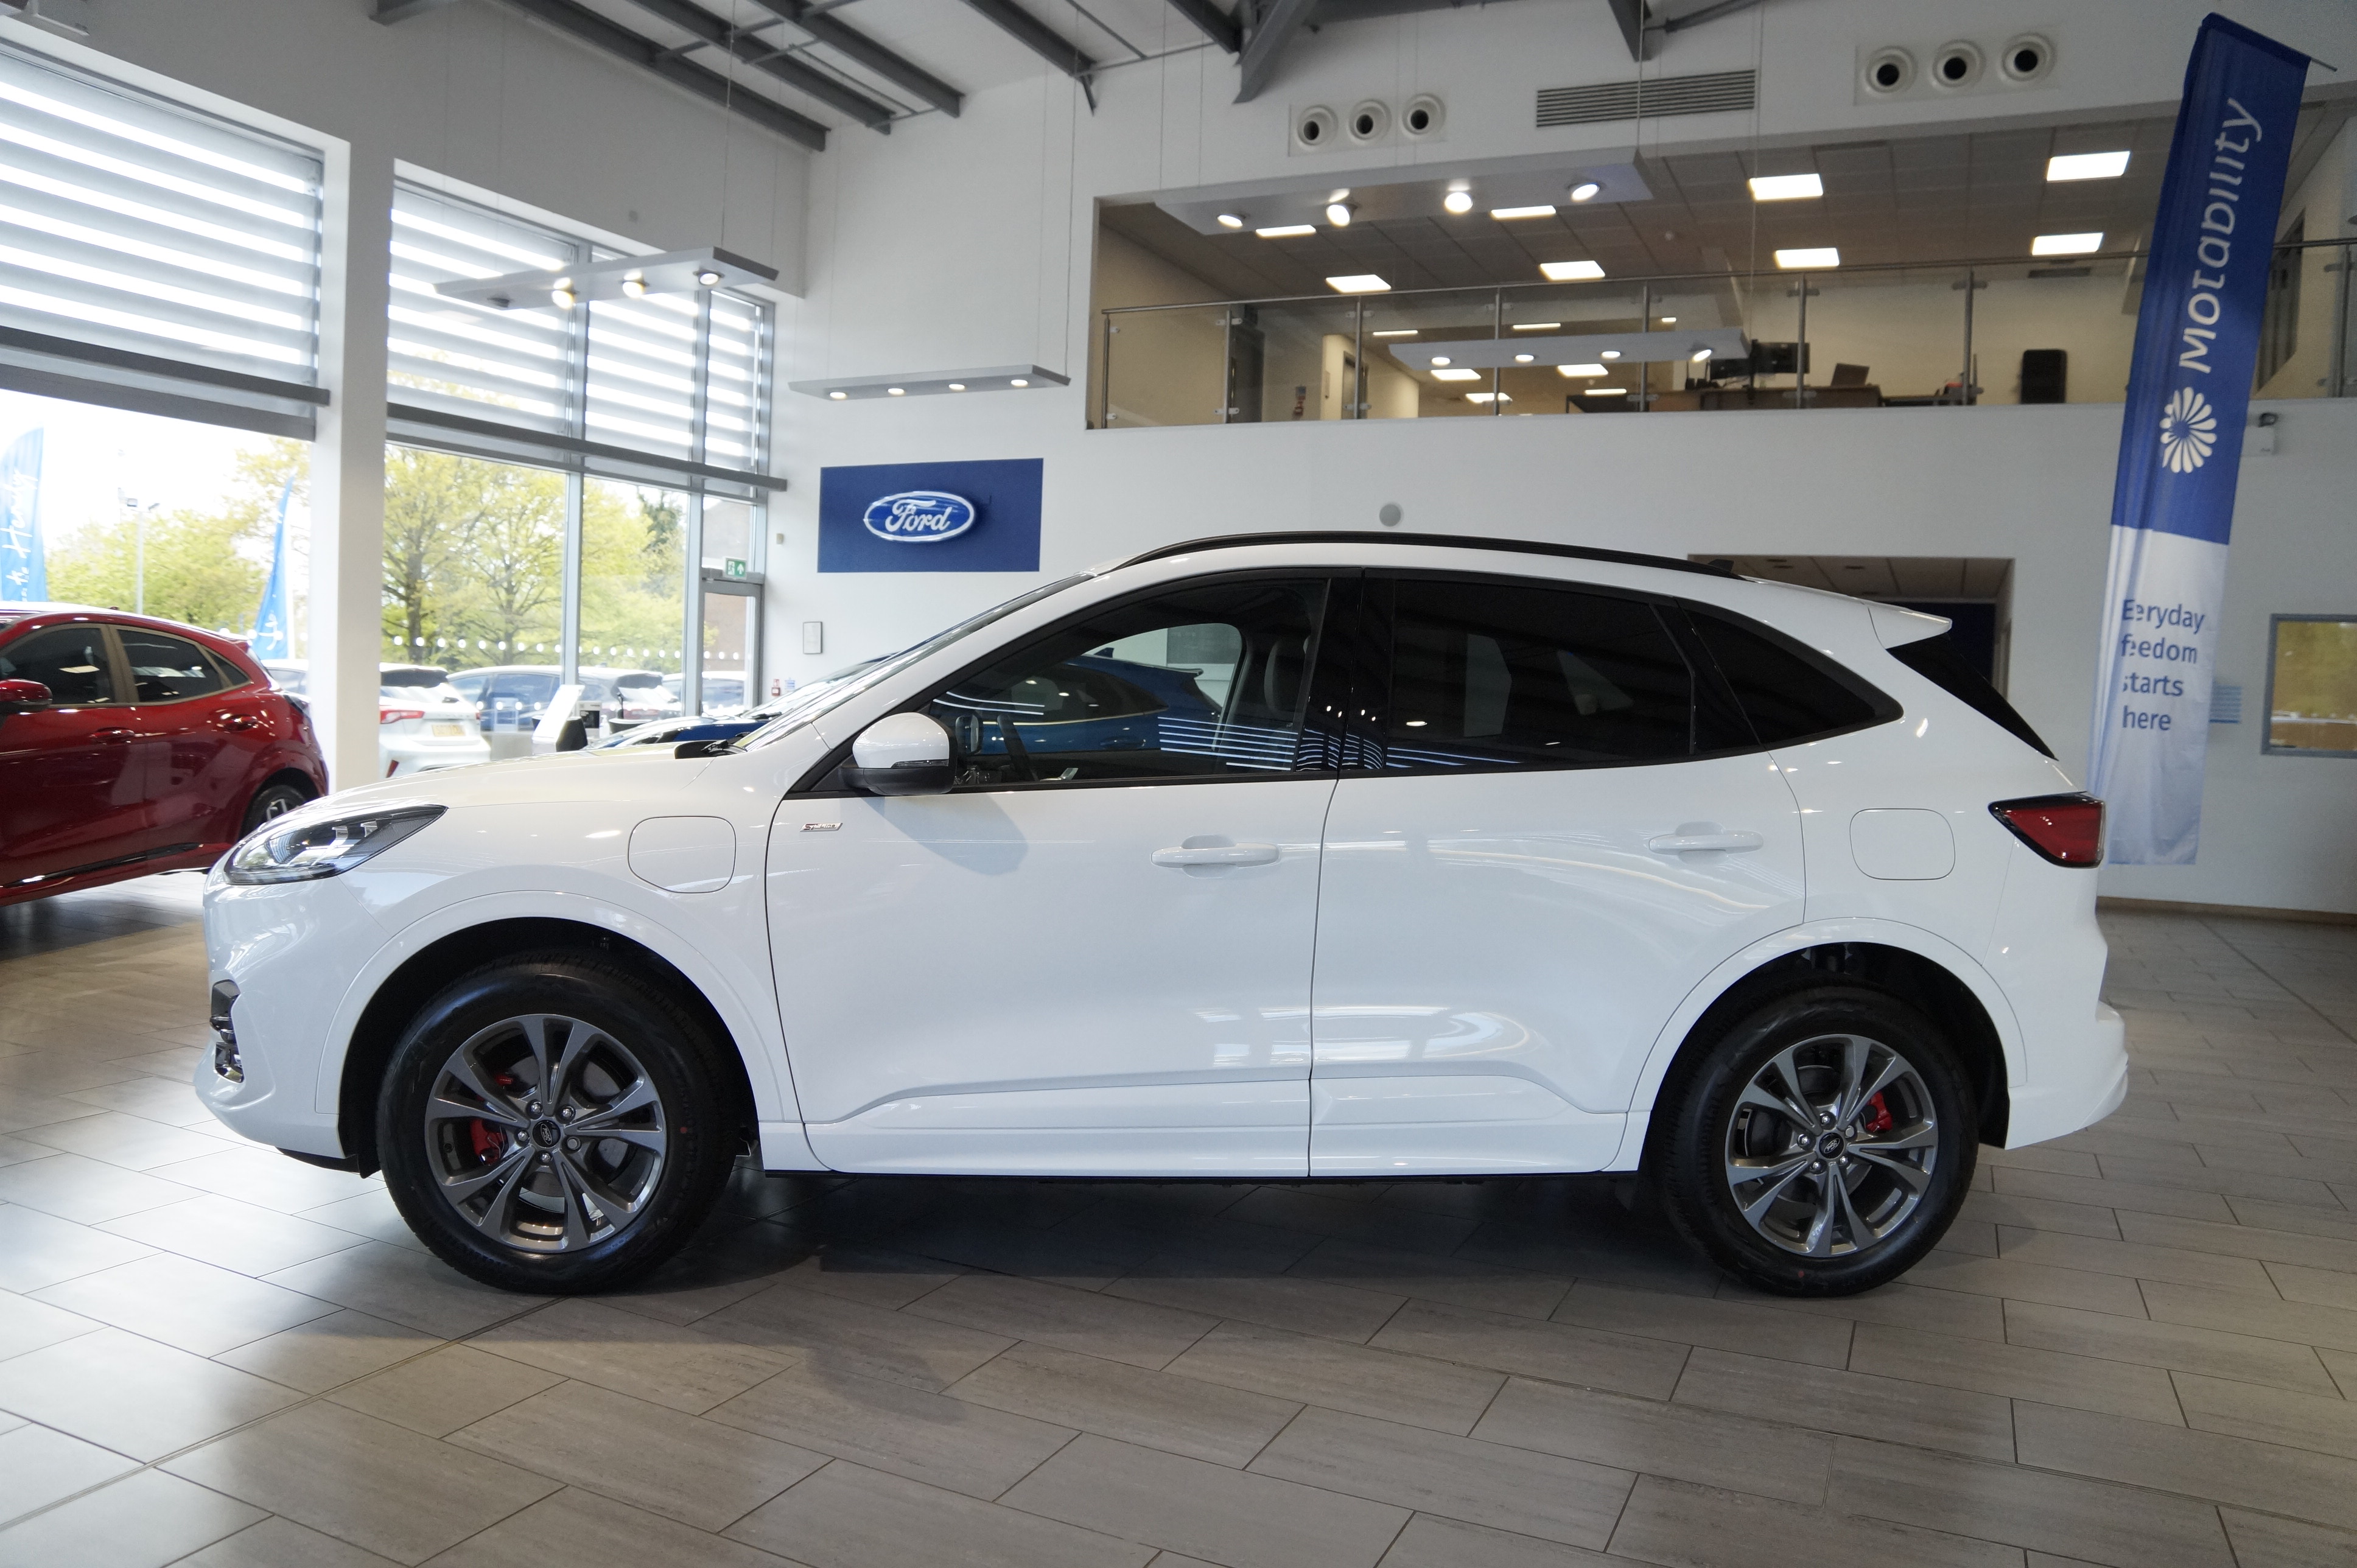 KUGA ST-LINE EDITION 5 DOOR 2.5L DURATEC PHEV 225PS FWD CVT AUTOMATIC